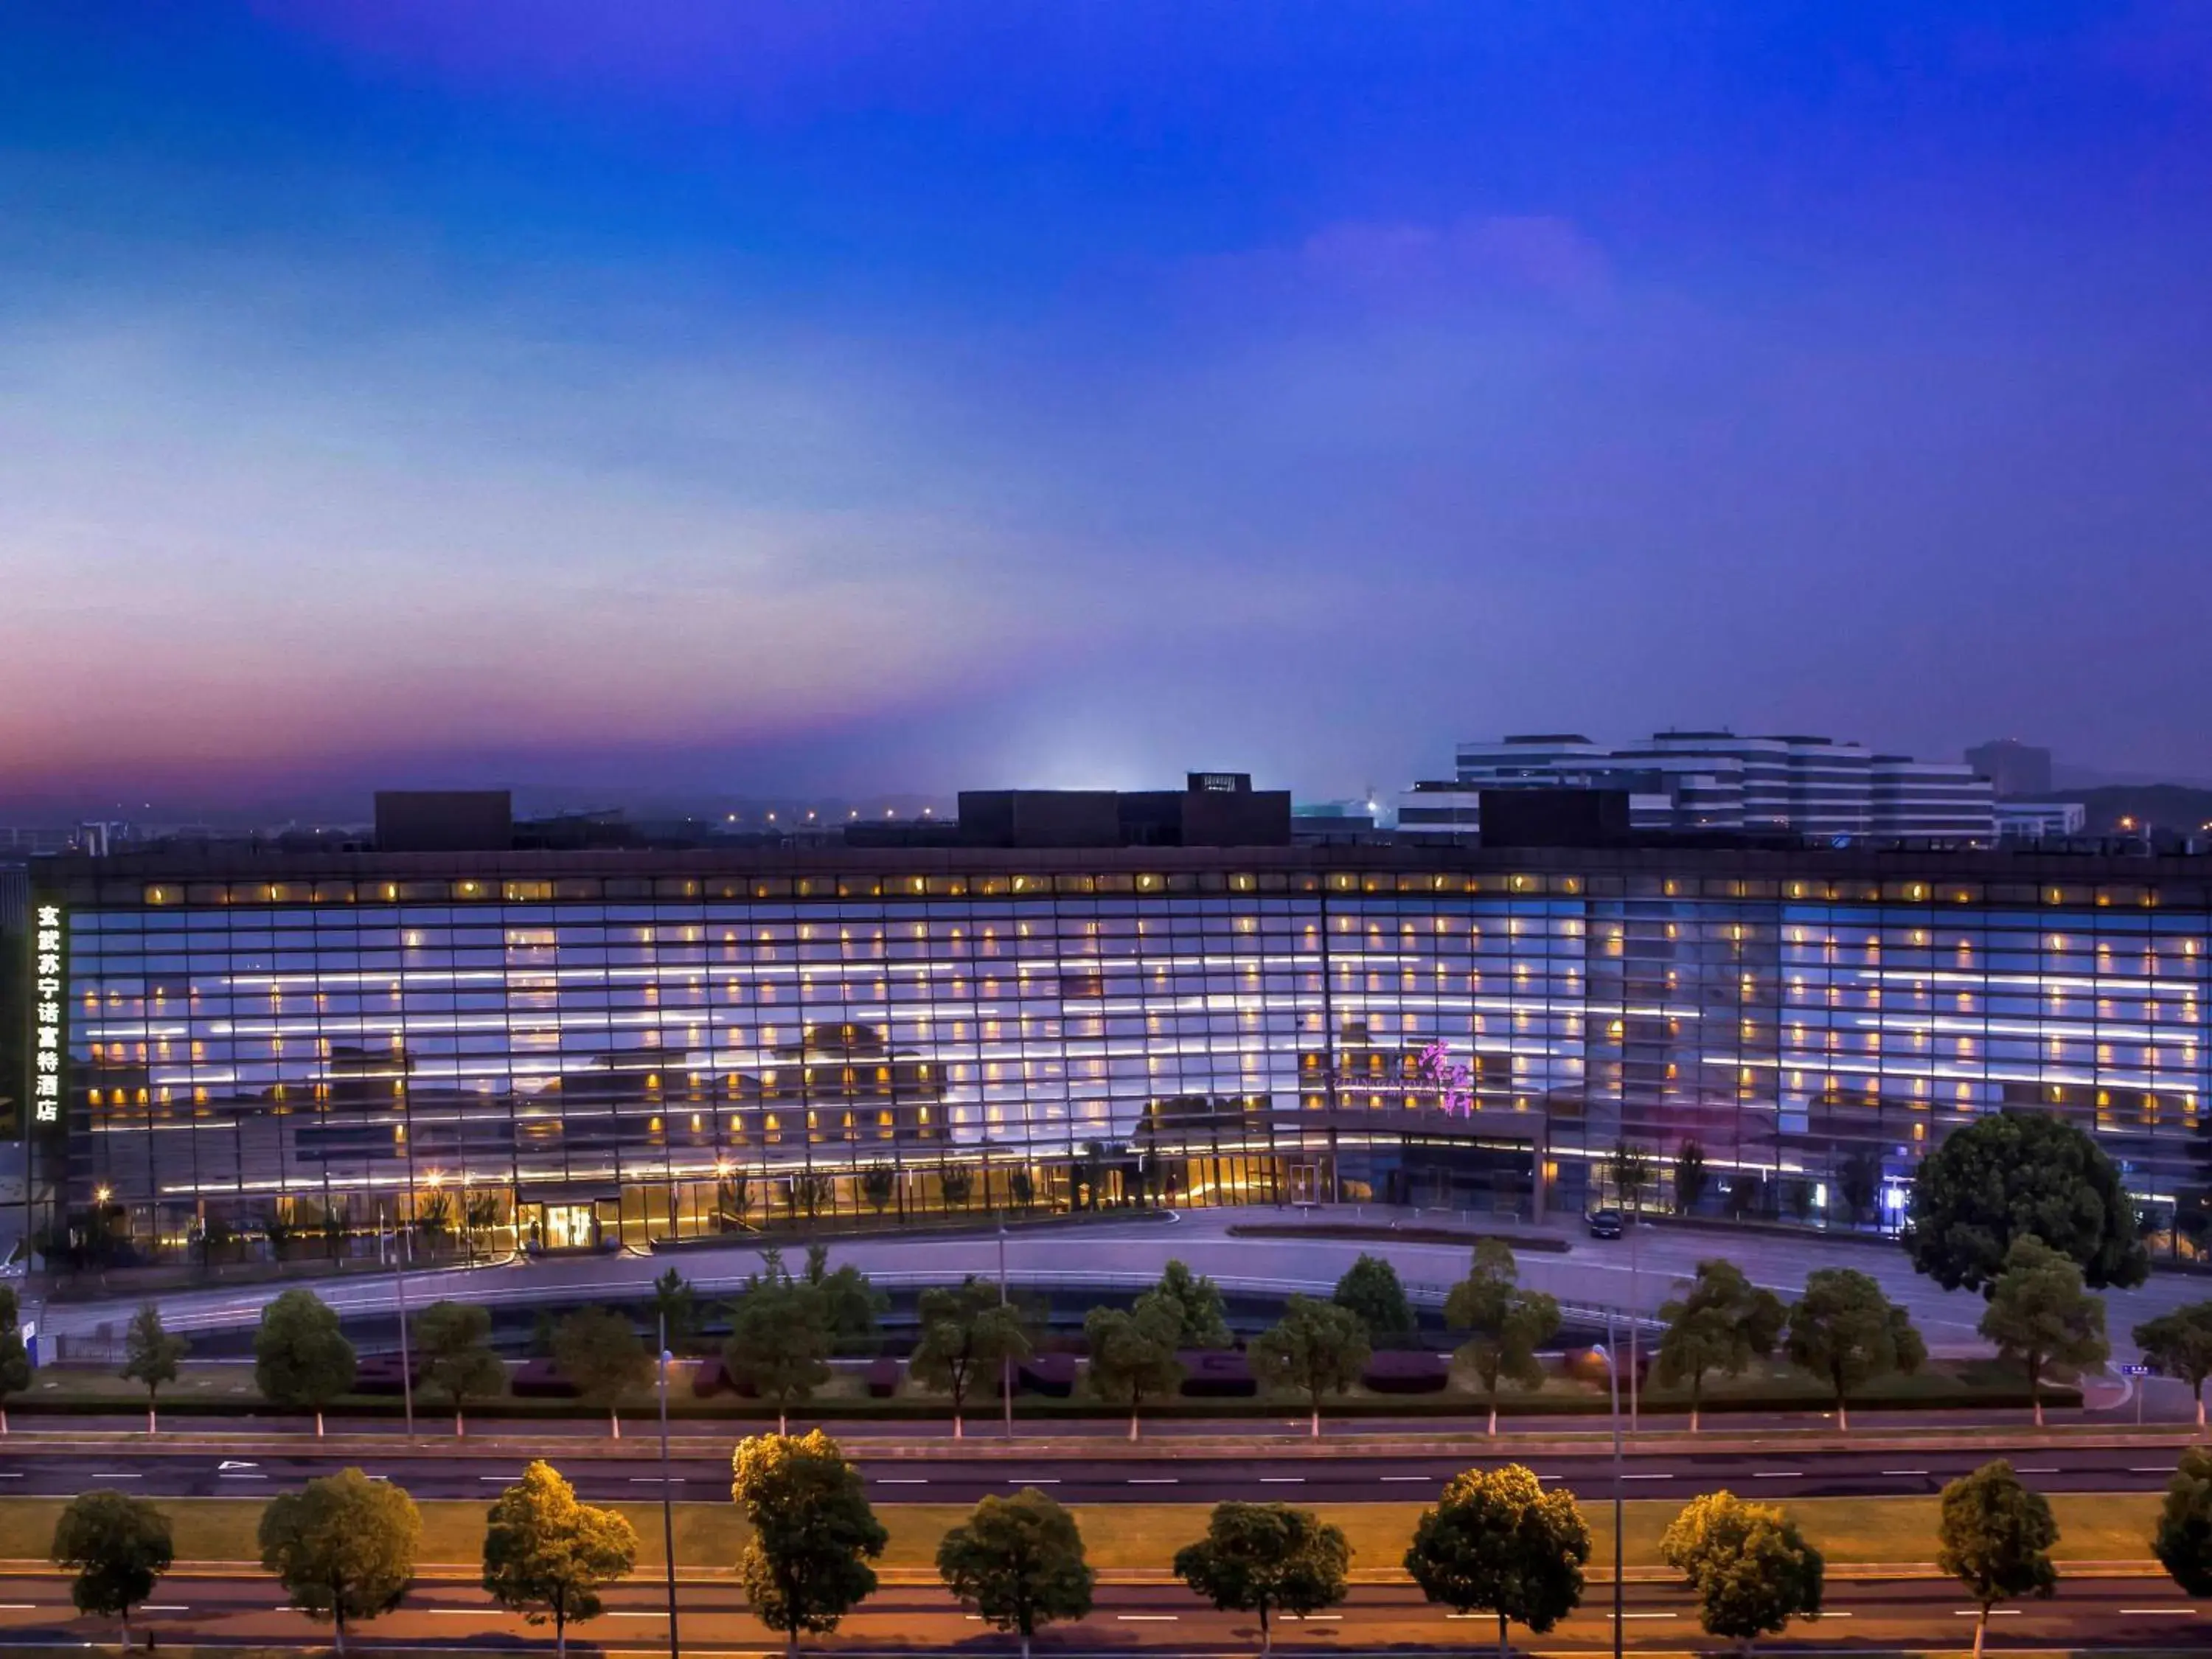 Property building in Novotel Nanjing East Suning Galaxy